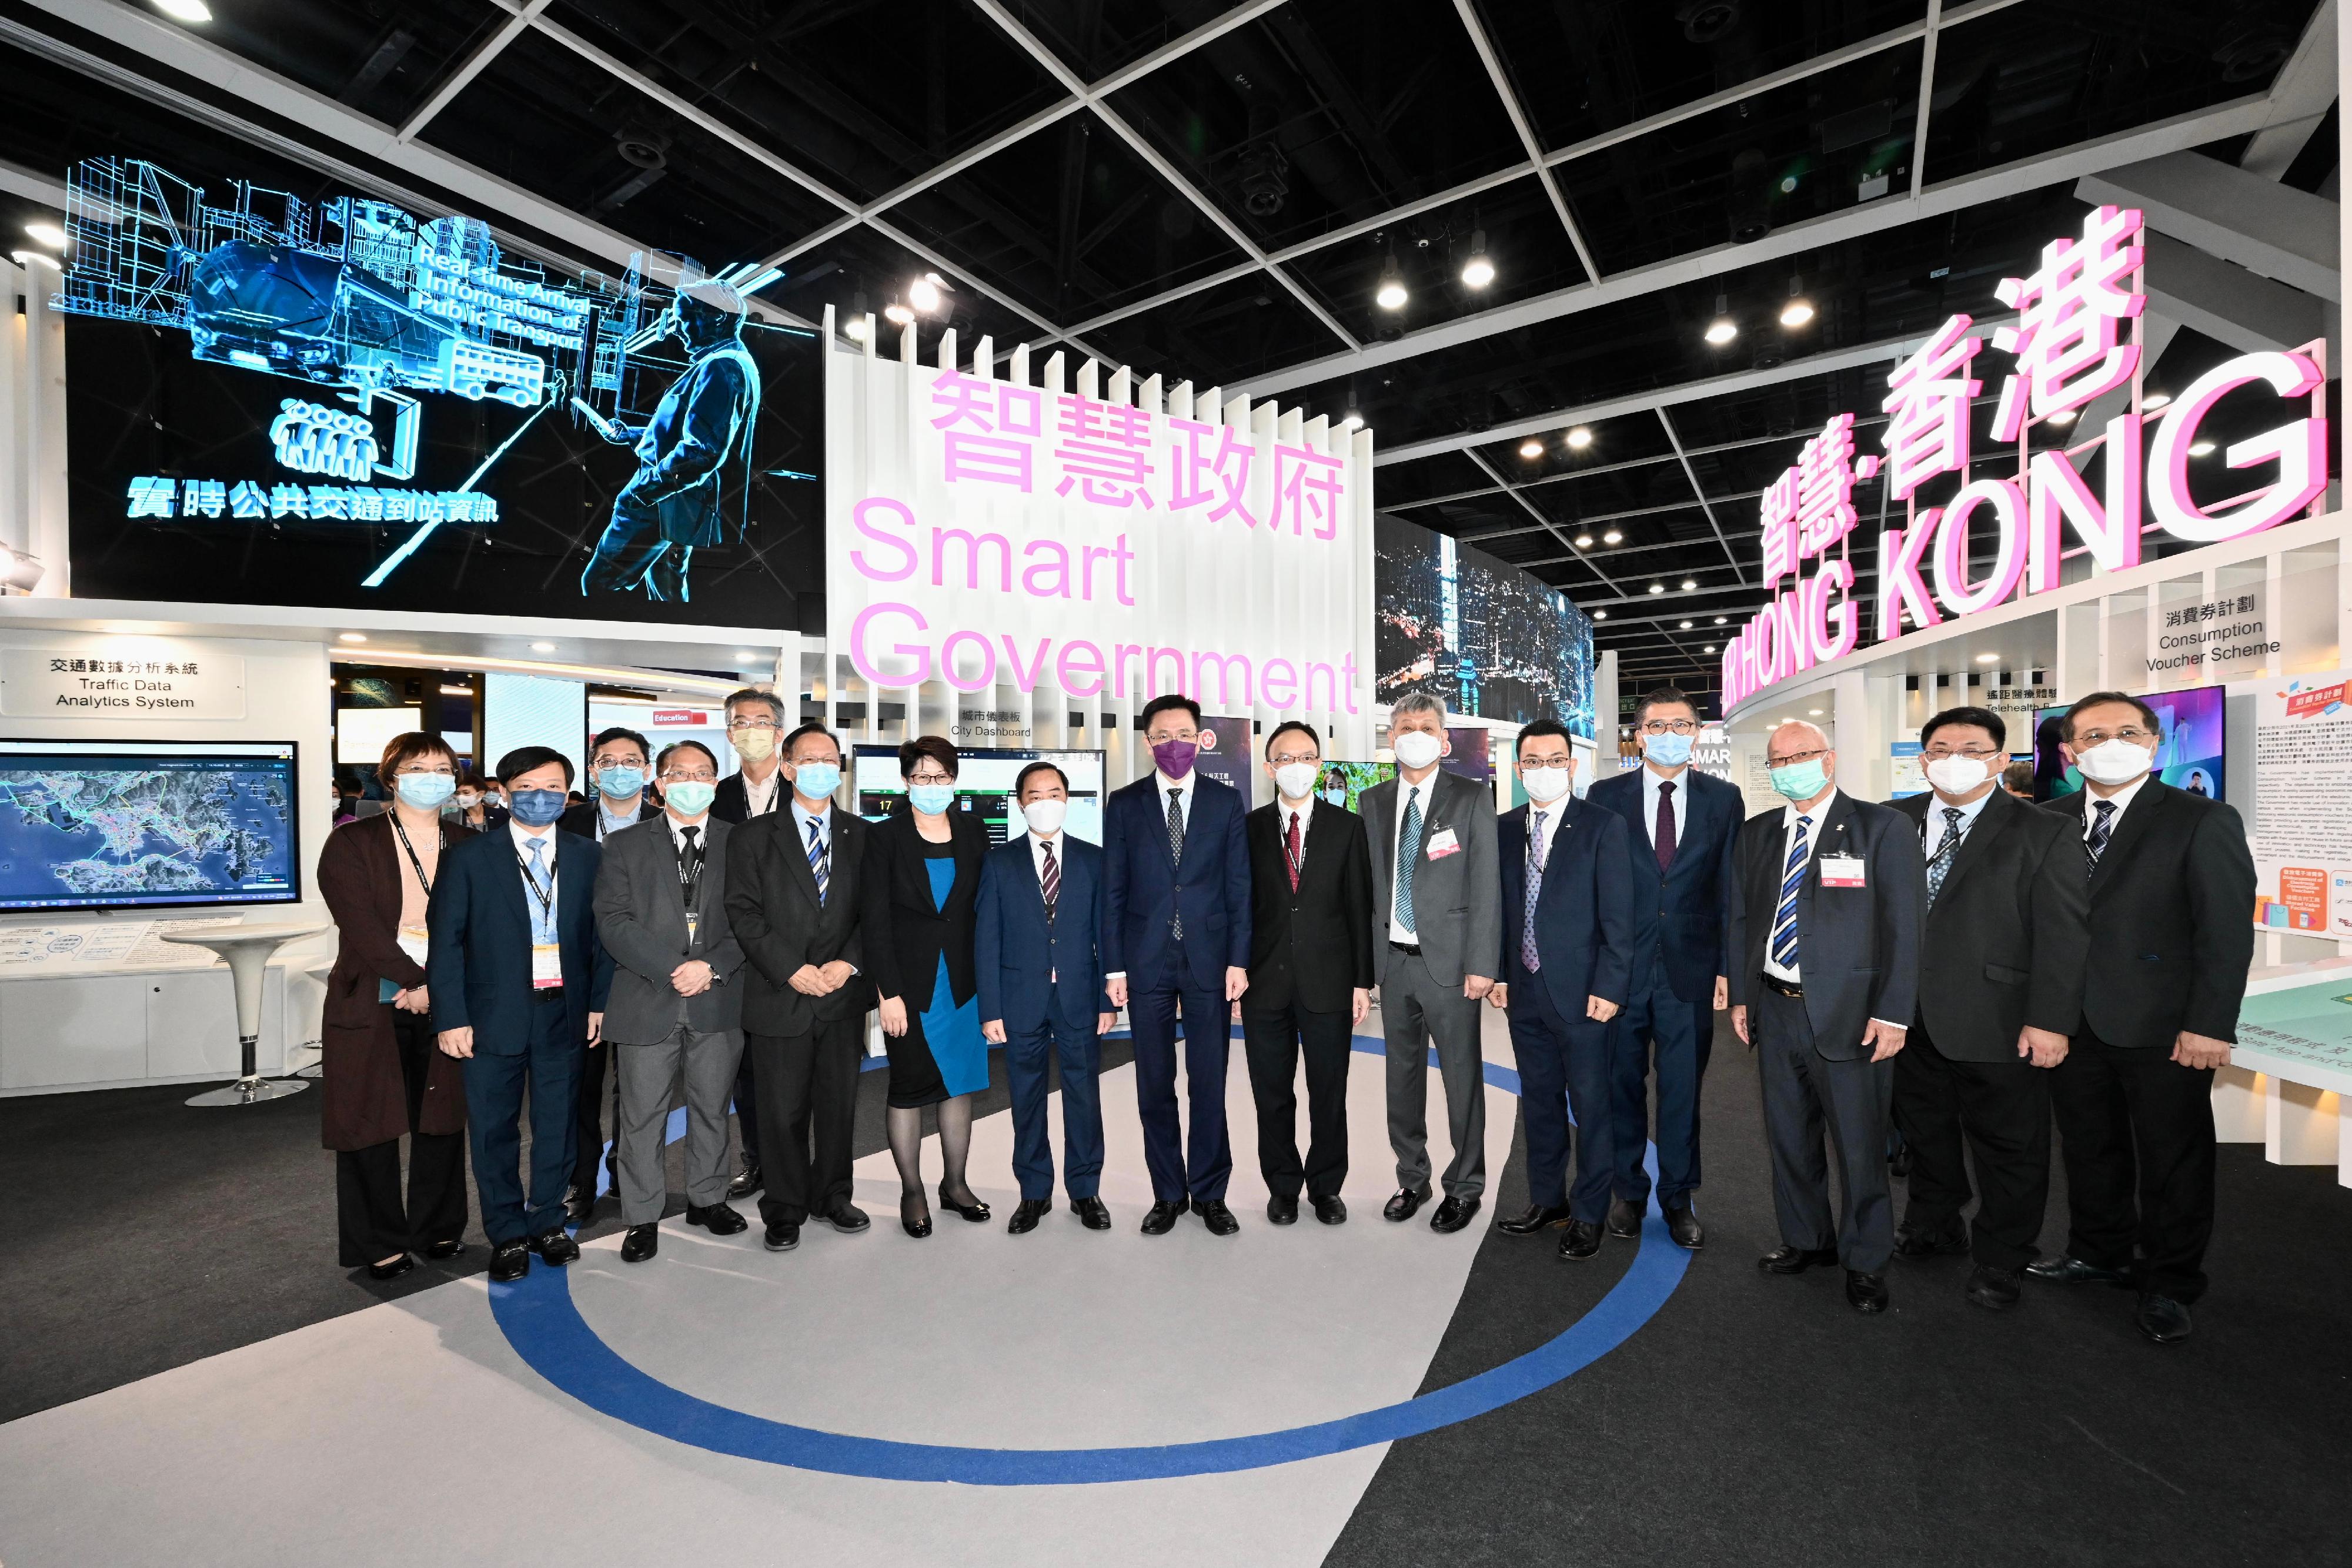 The Secretary for Innovation, Technology and Industry, Professor Sun Dong, visited the Smart Government Pavilion at the International ICT Expo today (October 13). Professor Sun (eighth right) is pictured with the Government Chief Information Officer, Mr Victor Lam (seventh right), colleagues from the Office of the Government Chief Information Officer, and other visiting guests.